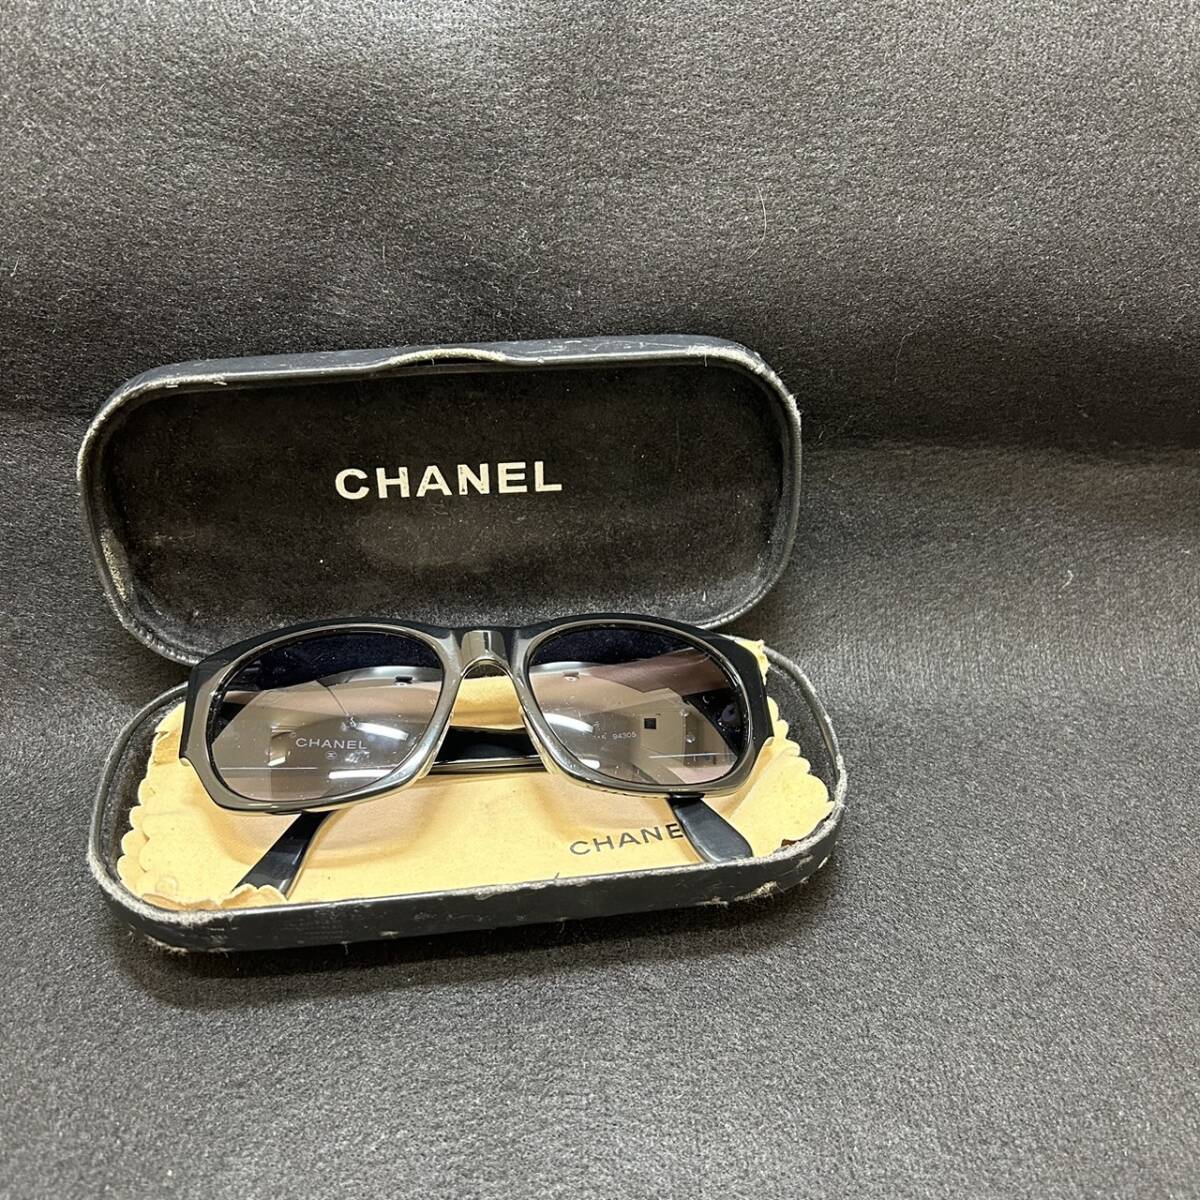 **Chanel Chanel sunglasses case attaching case scratch equipped nose part dirt equipped #4242**